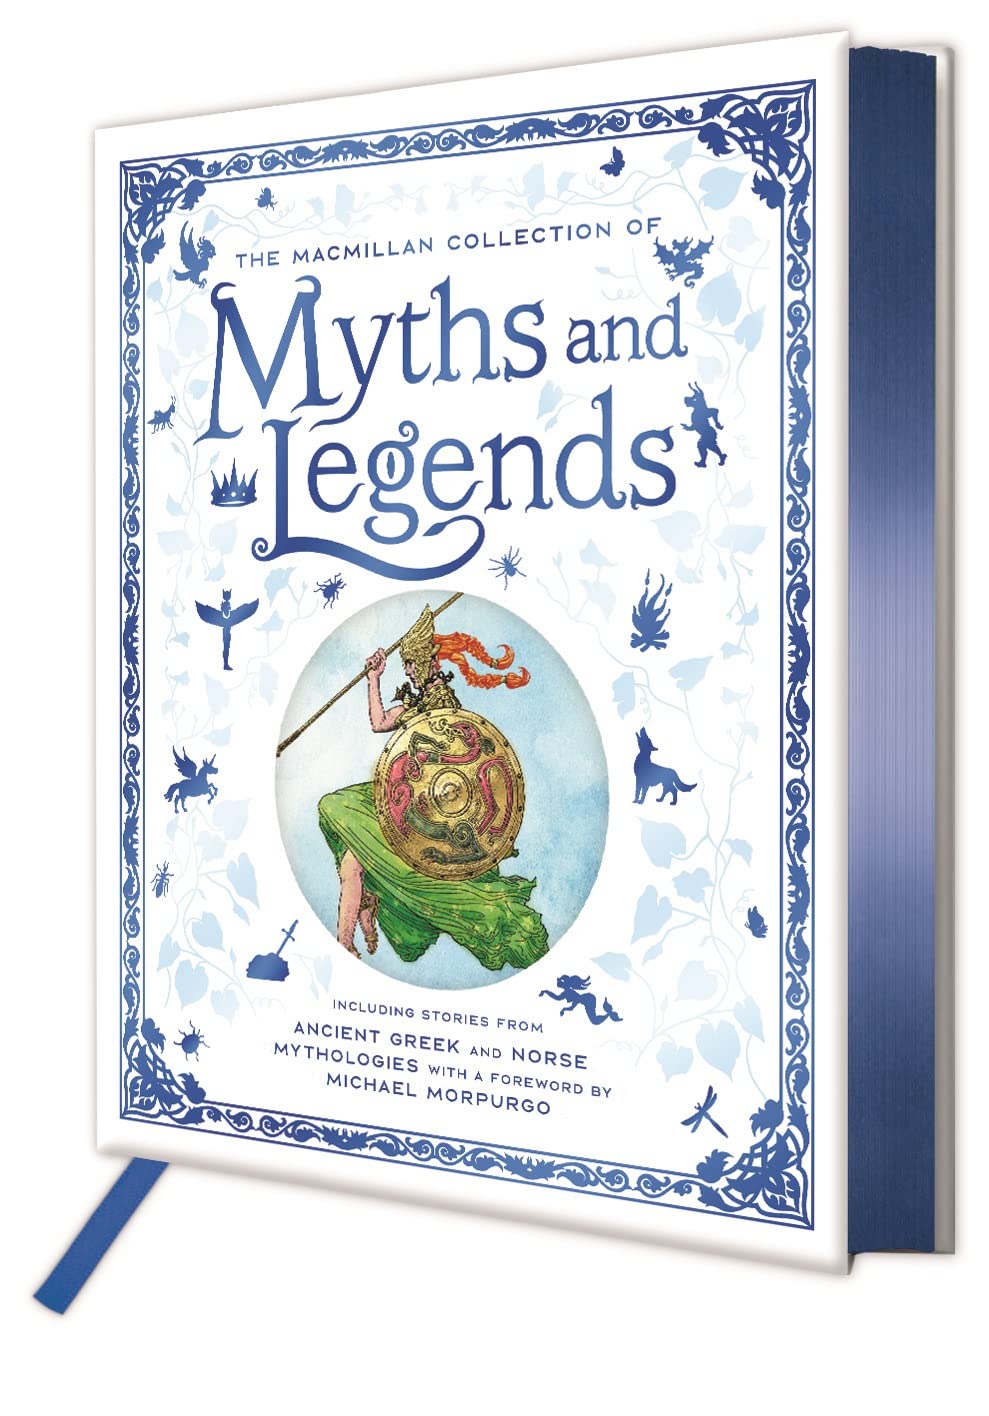 Michael Morpurgo (foreward by): The Macmillan Collection of Myths and Legends